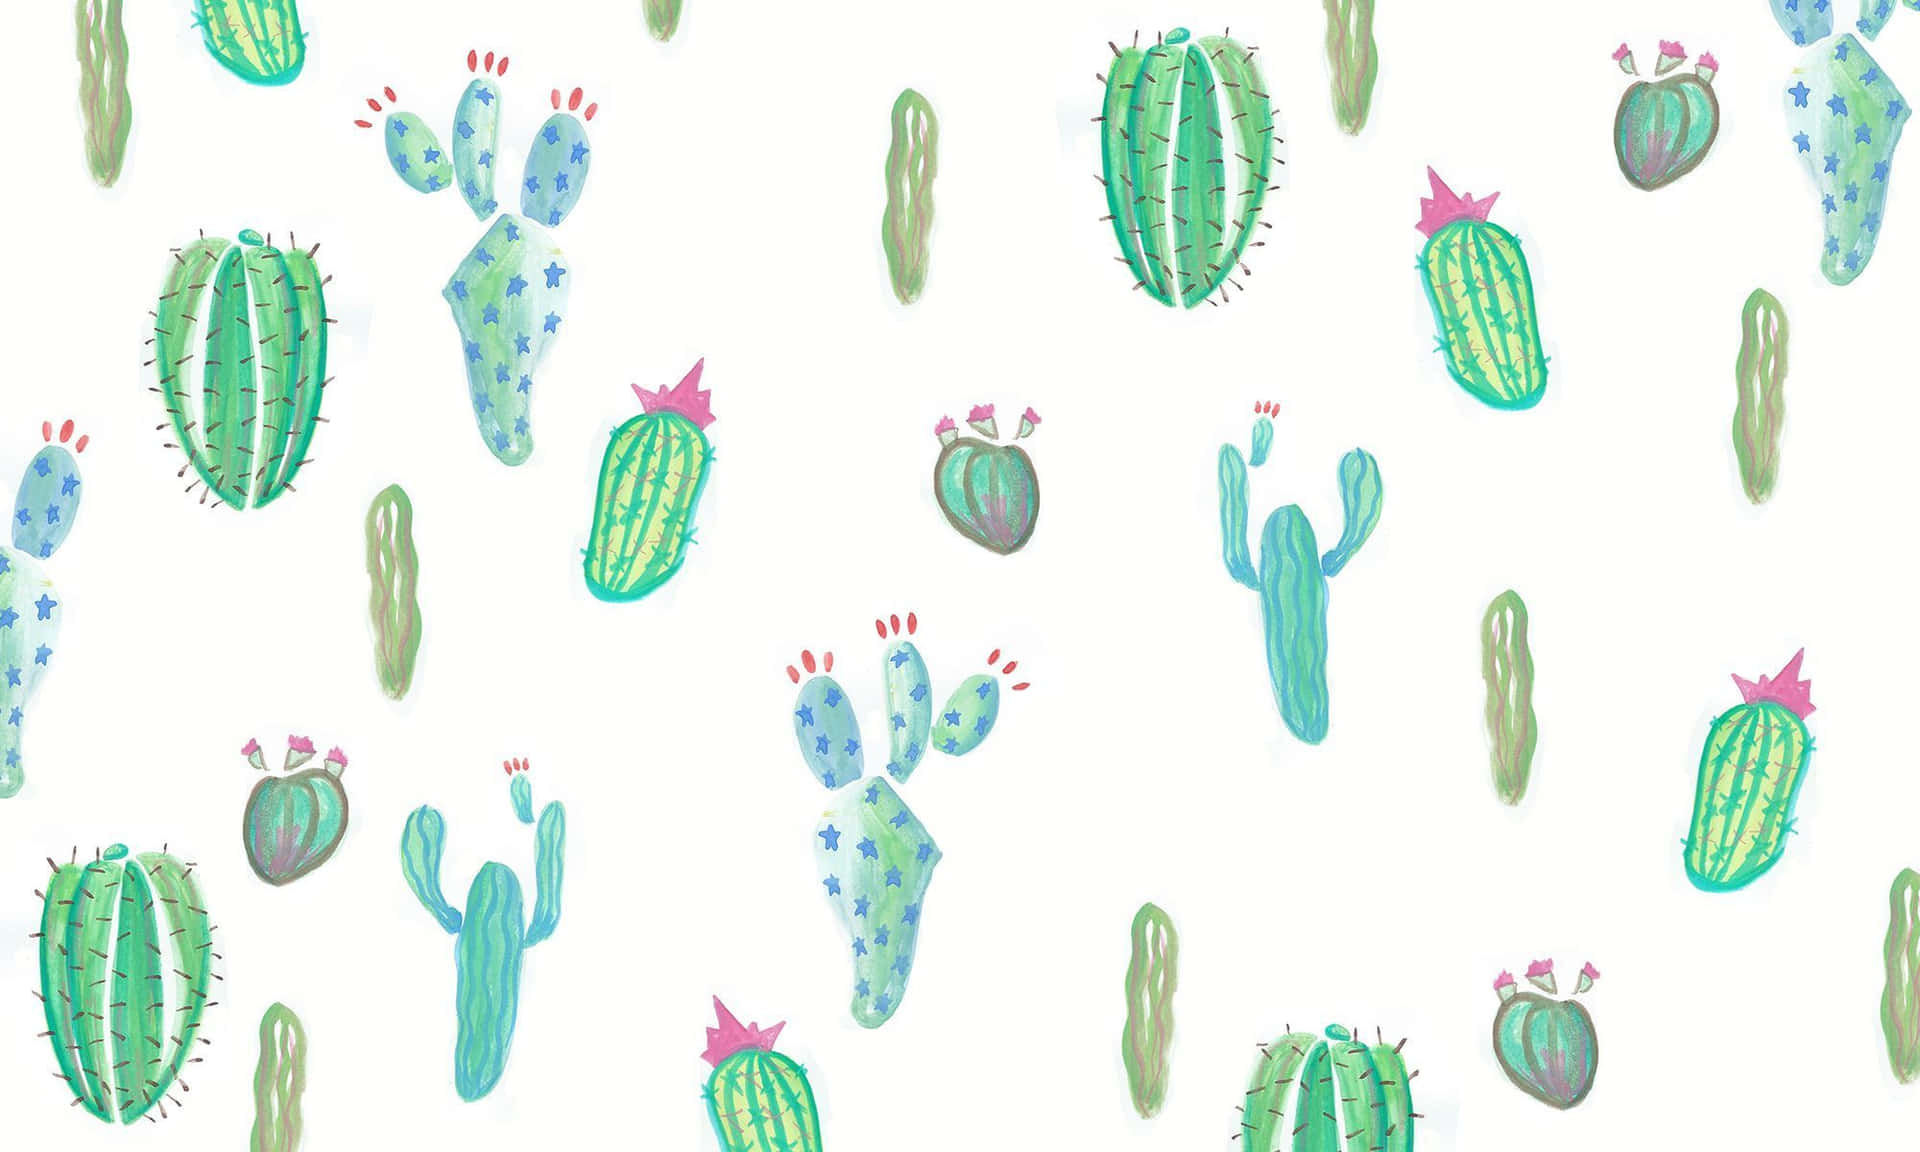 Cactus Wallpaper Pictures  Download Free Images on Unsplash